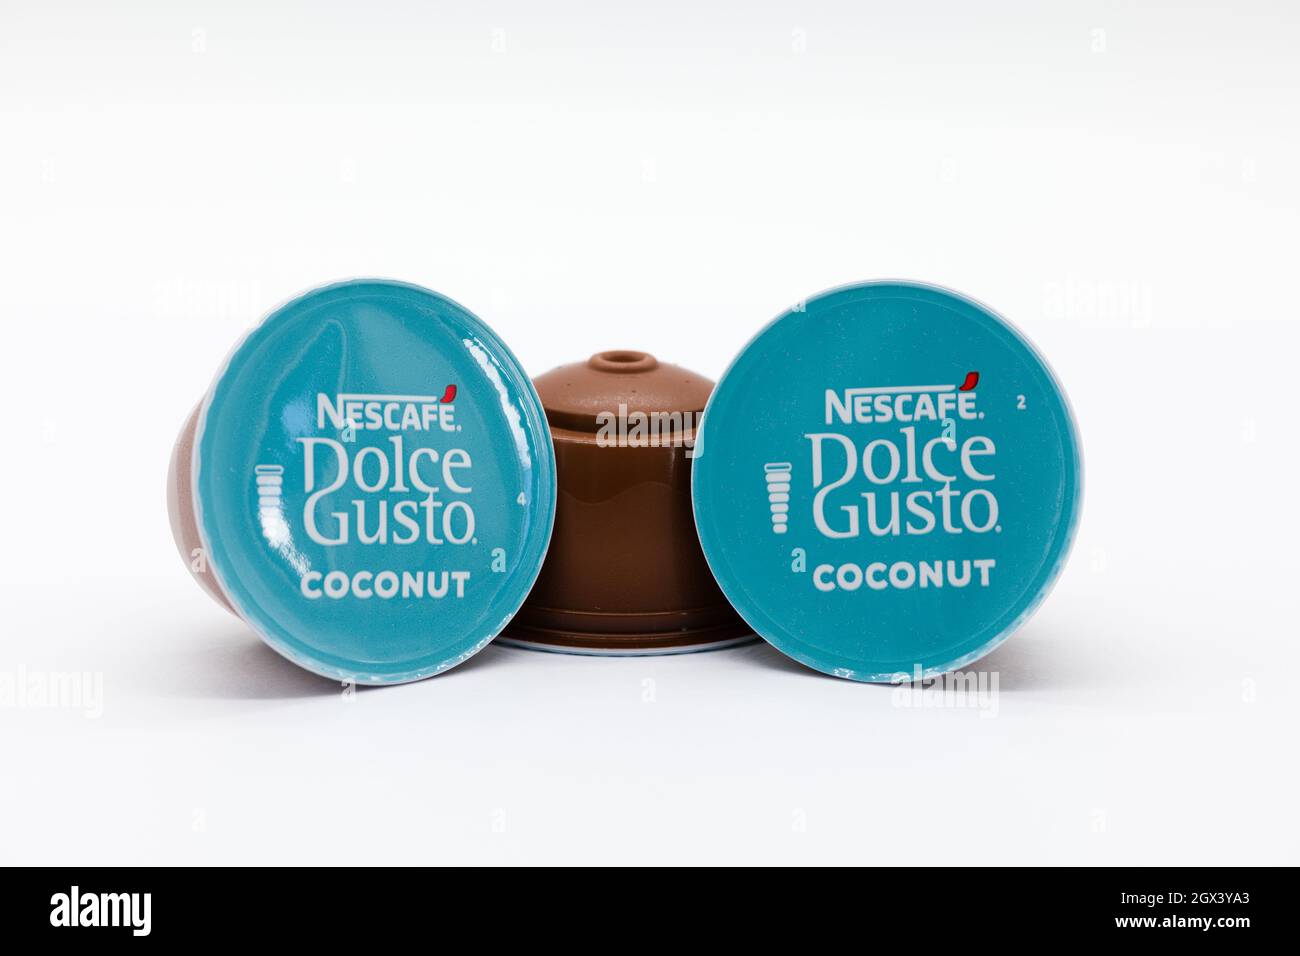 Irvine, Scotland, UK - September, 29, 2021: Three Nescafe Dolce-Gusto  branded Coconut flat white coffee pods in recyclable pods Stock Photo -  Alamy